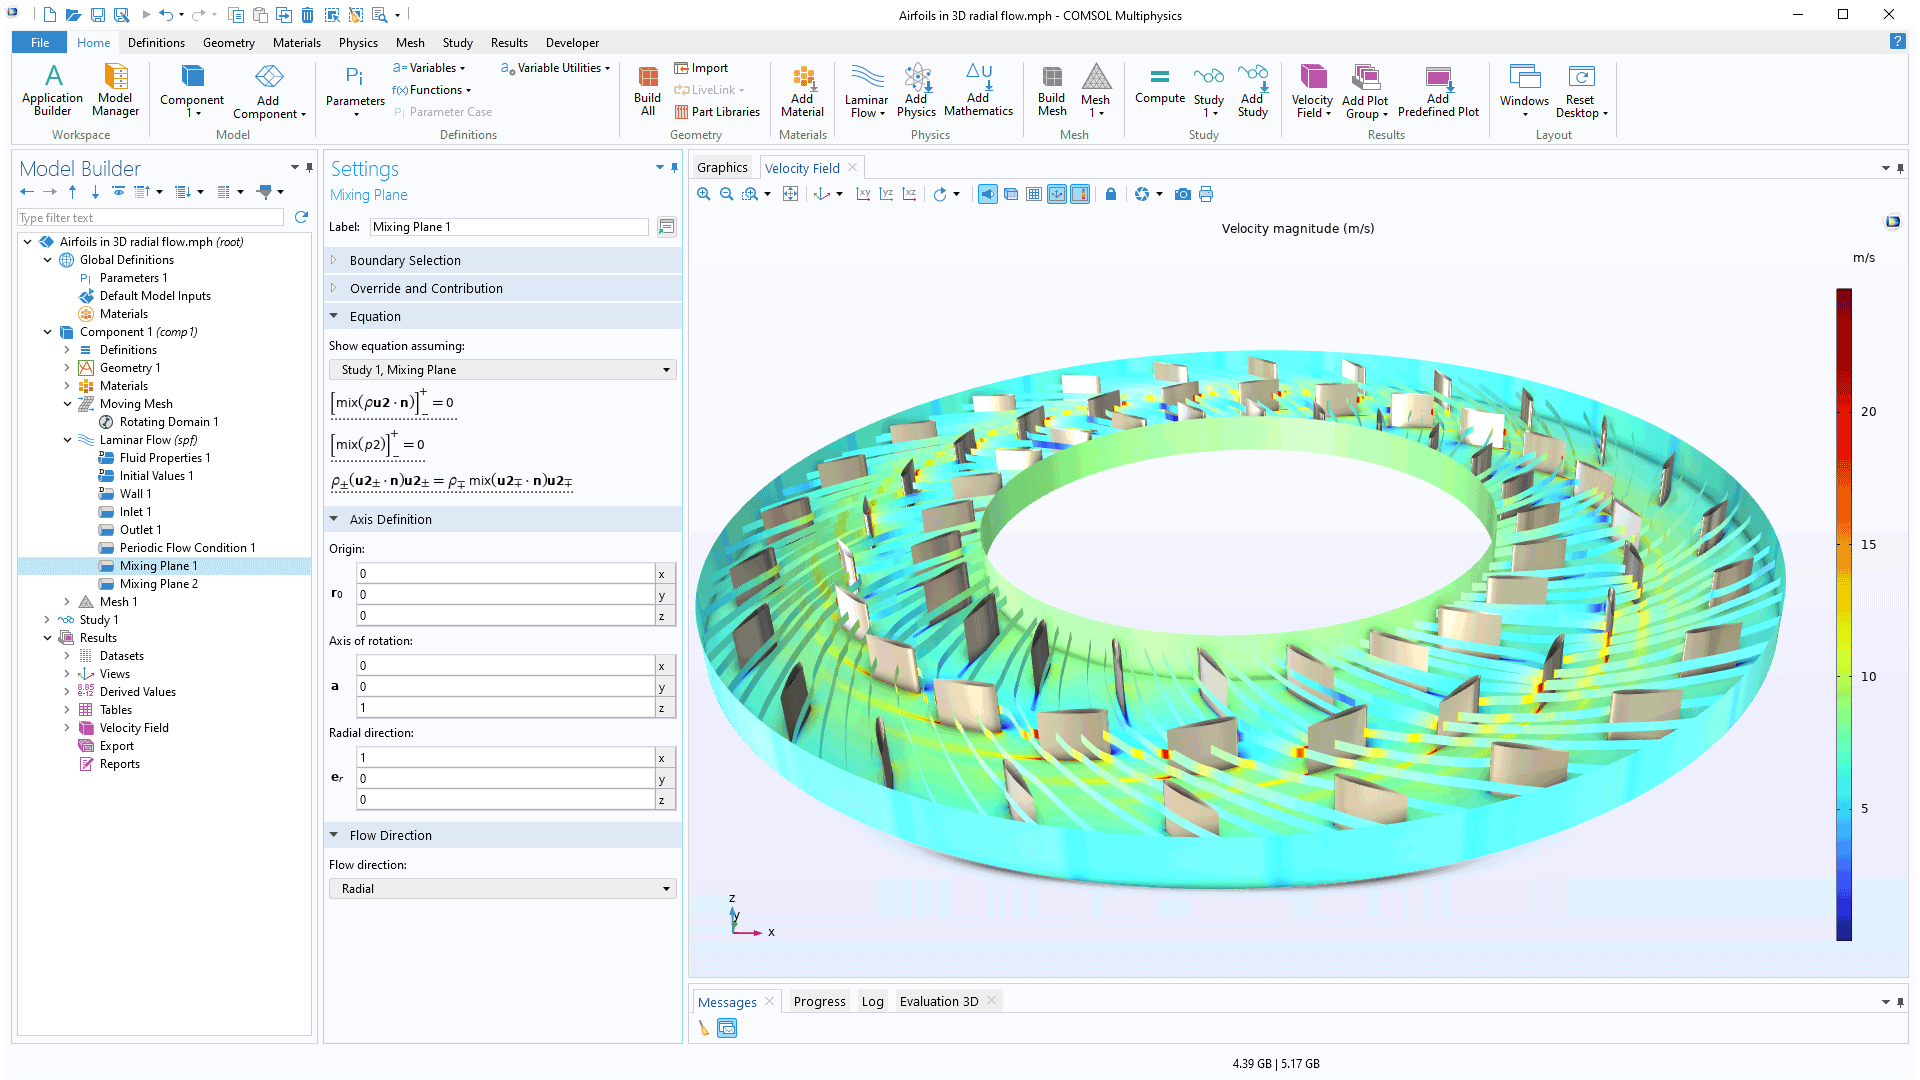 The COMSOL Multiphysics UI showing the Model Builder with the Mixing Plane node highlighted, the corresponding Settings window, and a rotor model in the Graphics window.